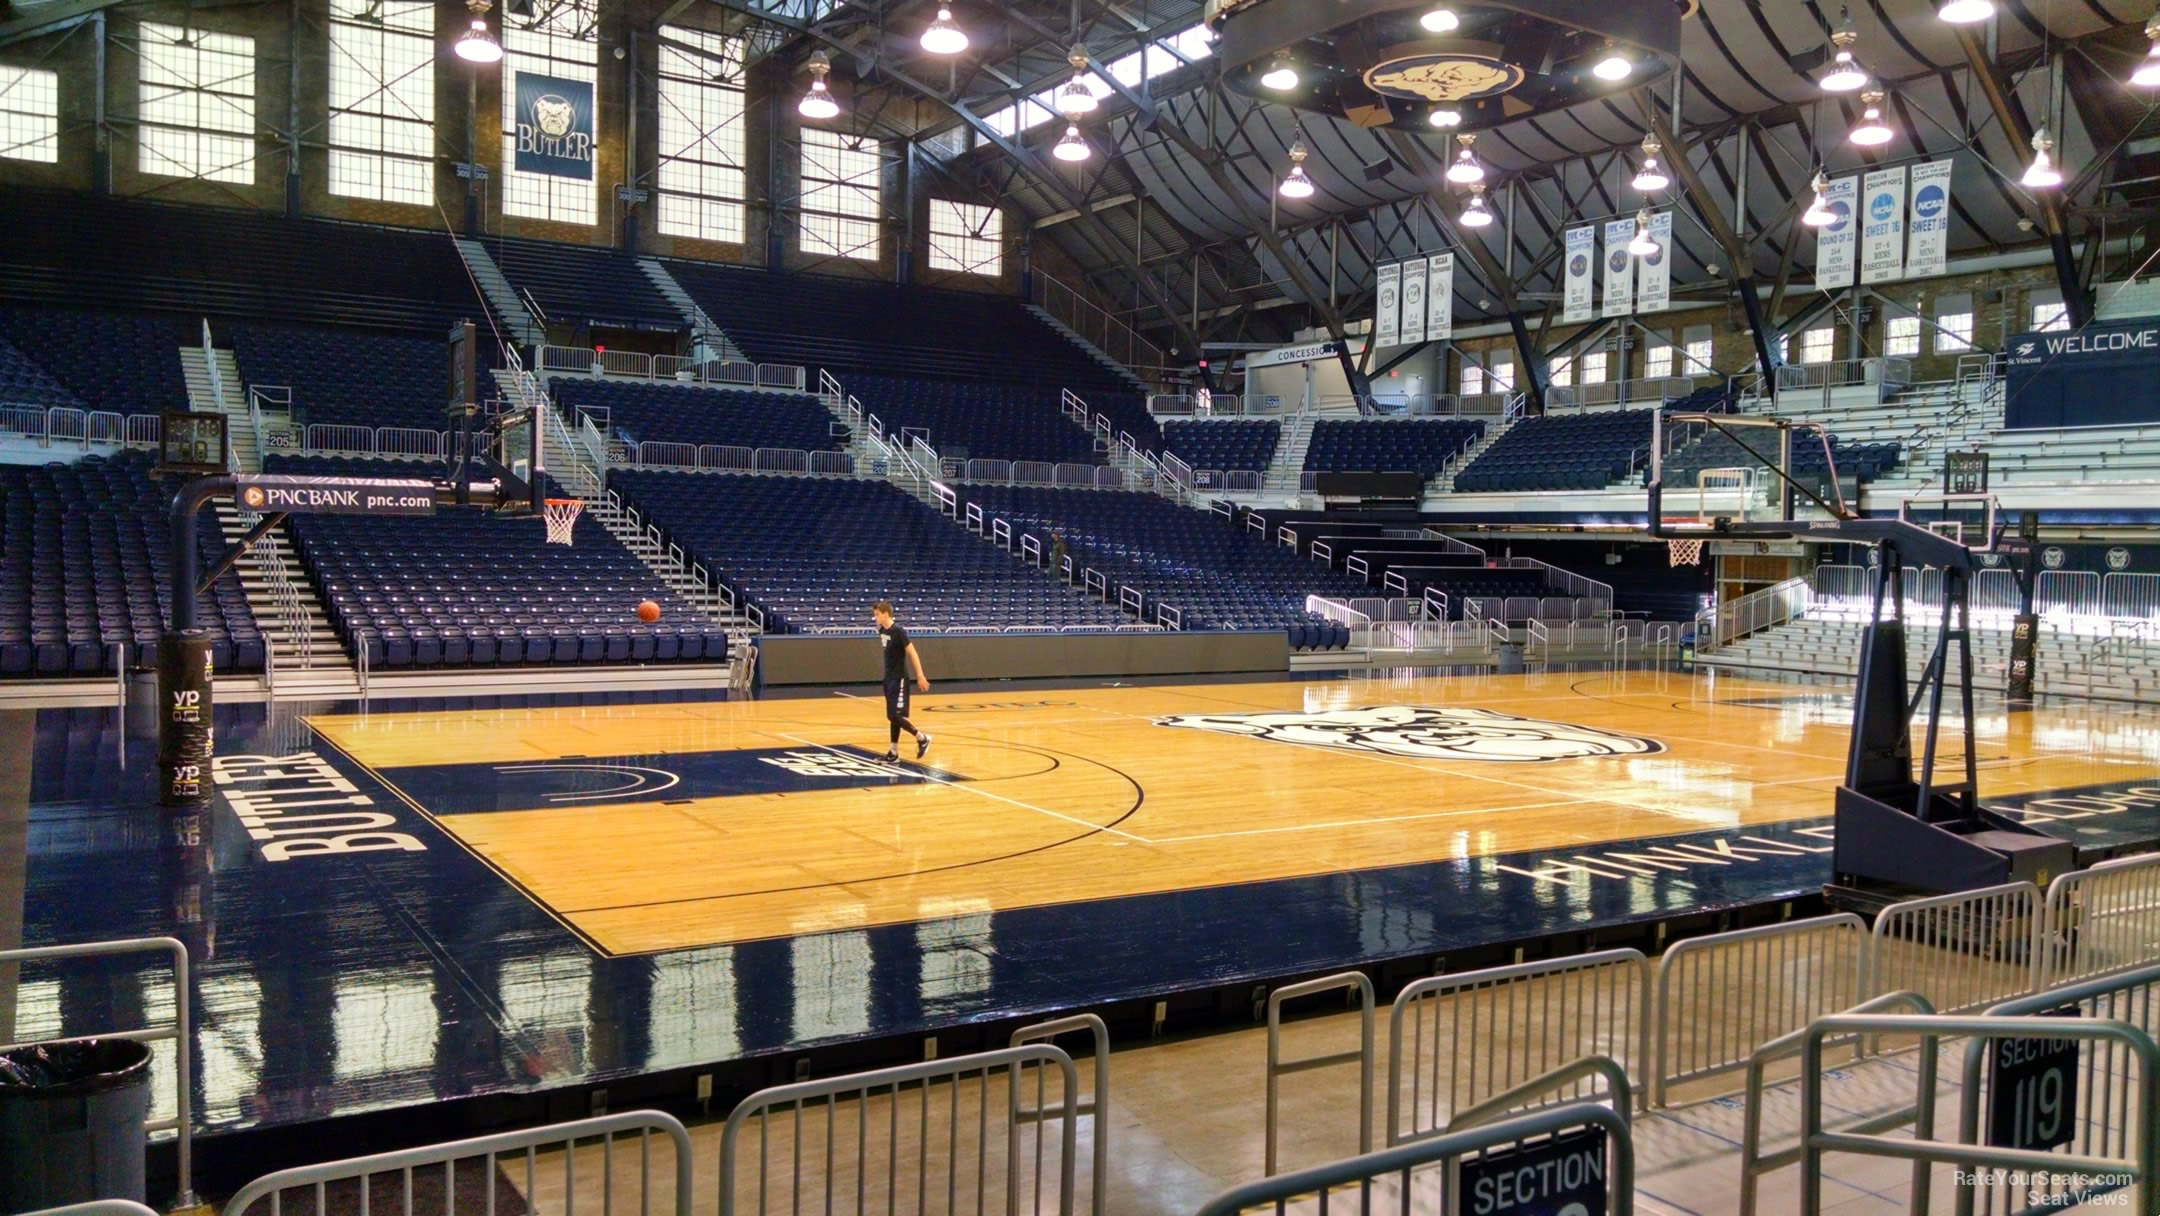 section 120, row 7 seat view  - hinkle fieldhouse